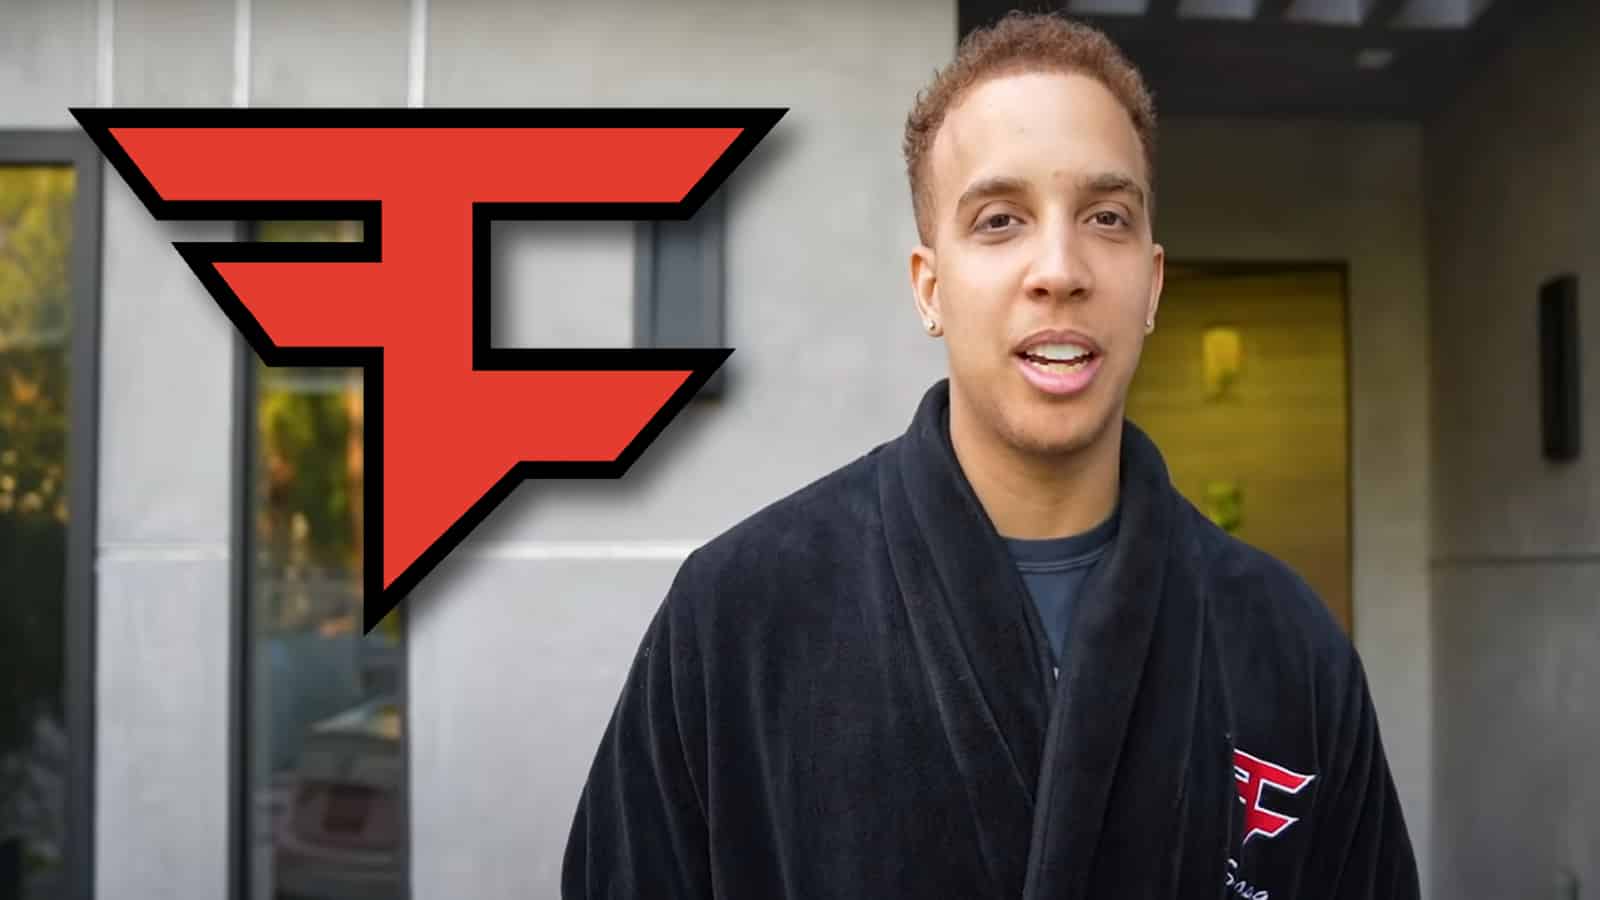 FaZe Swagg in new mansion